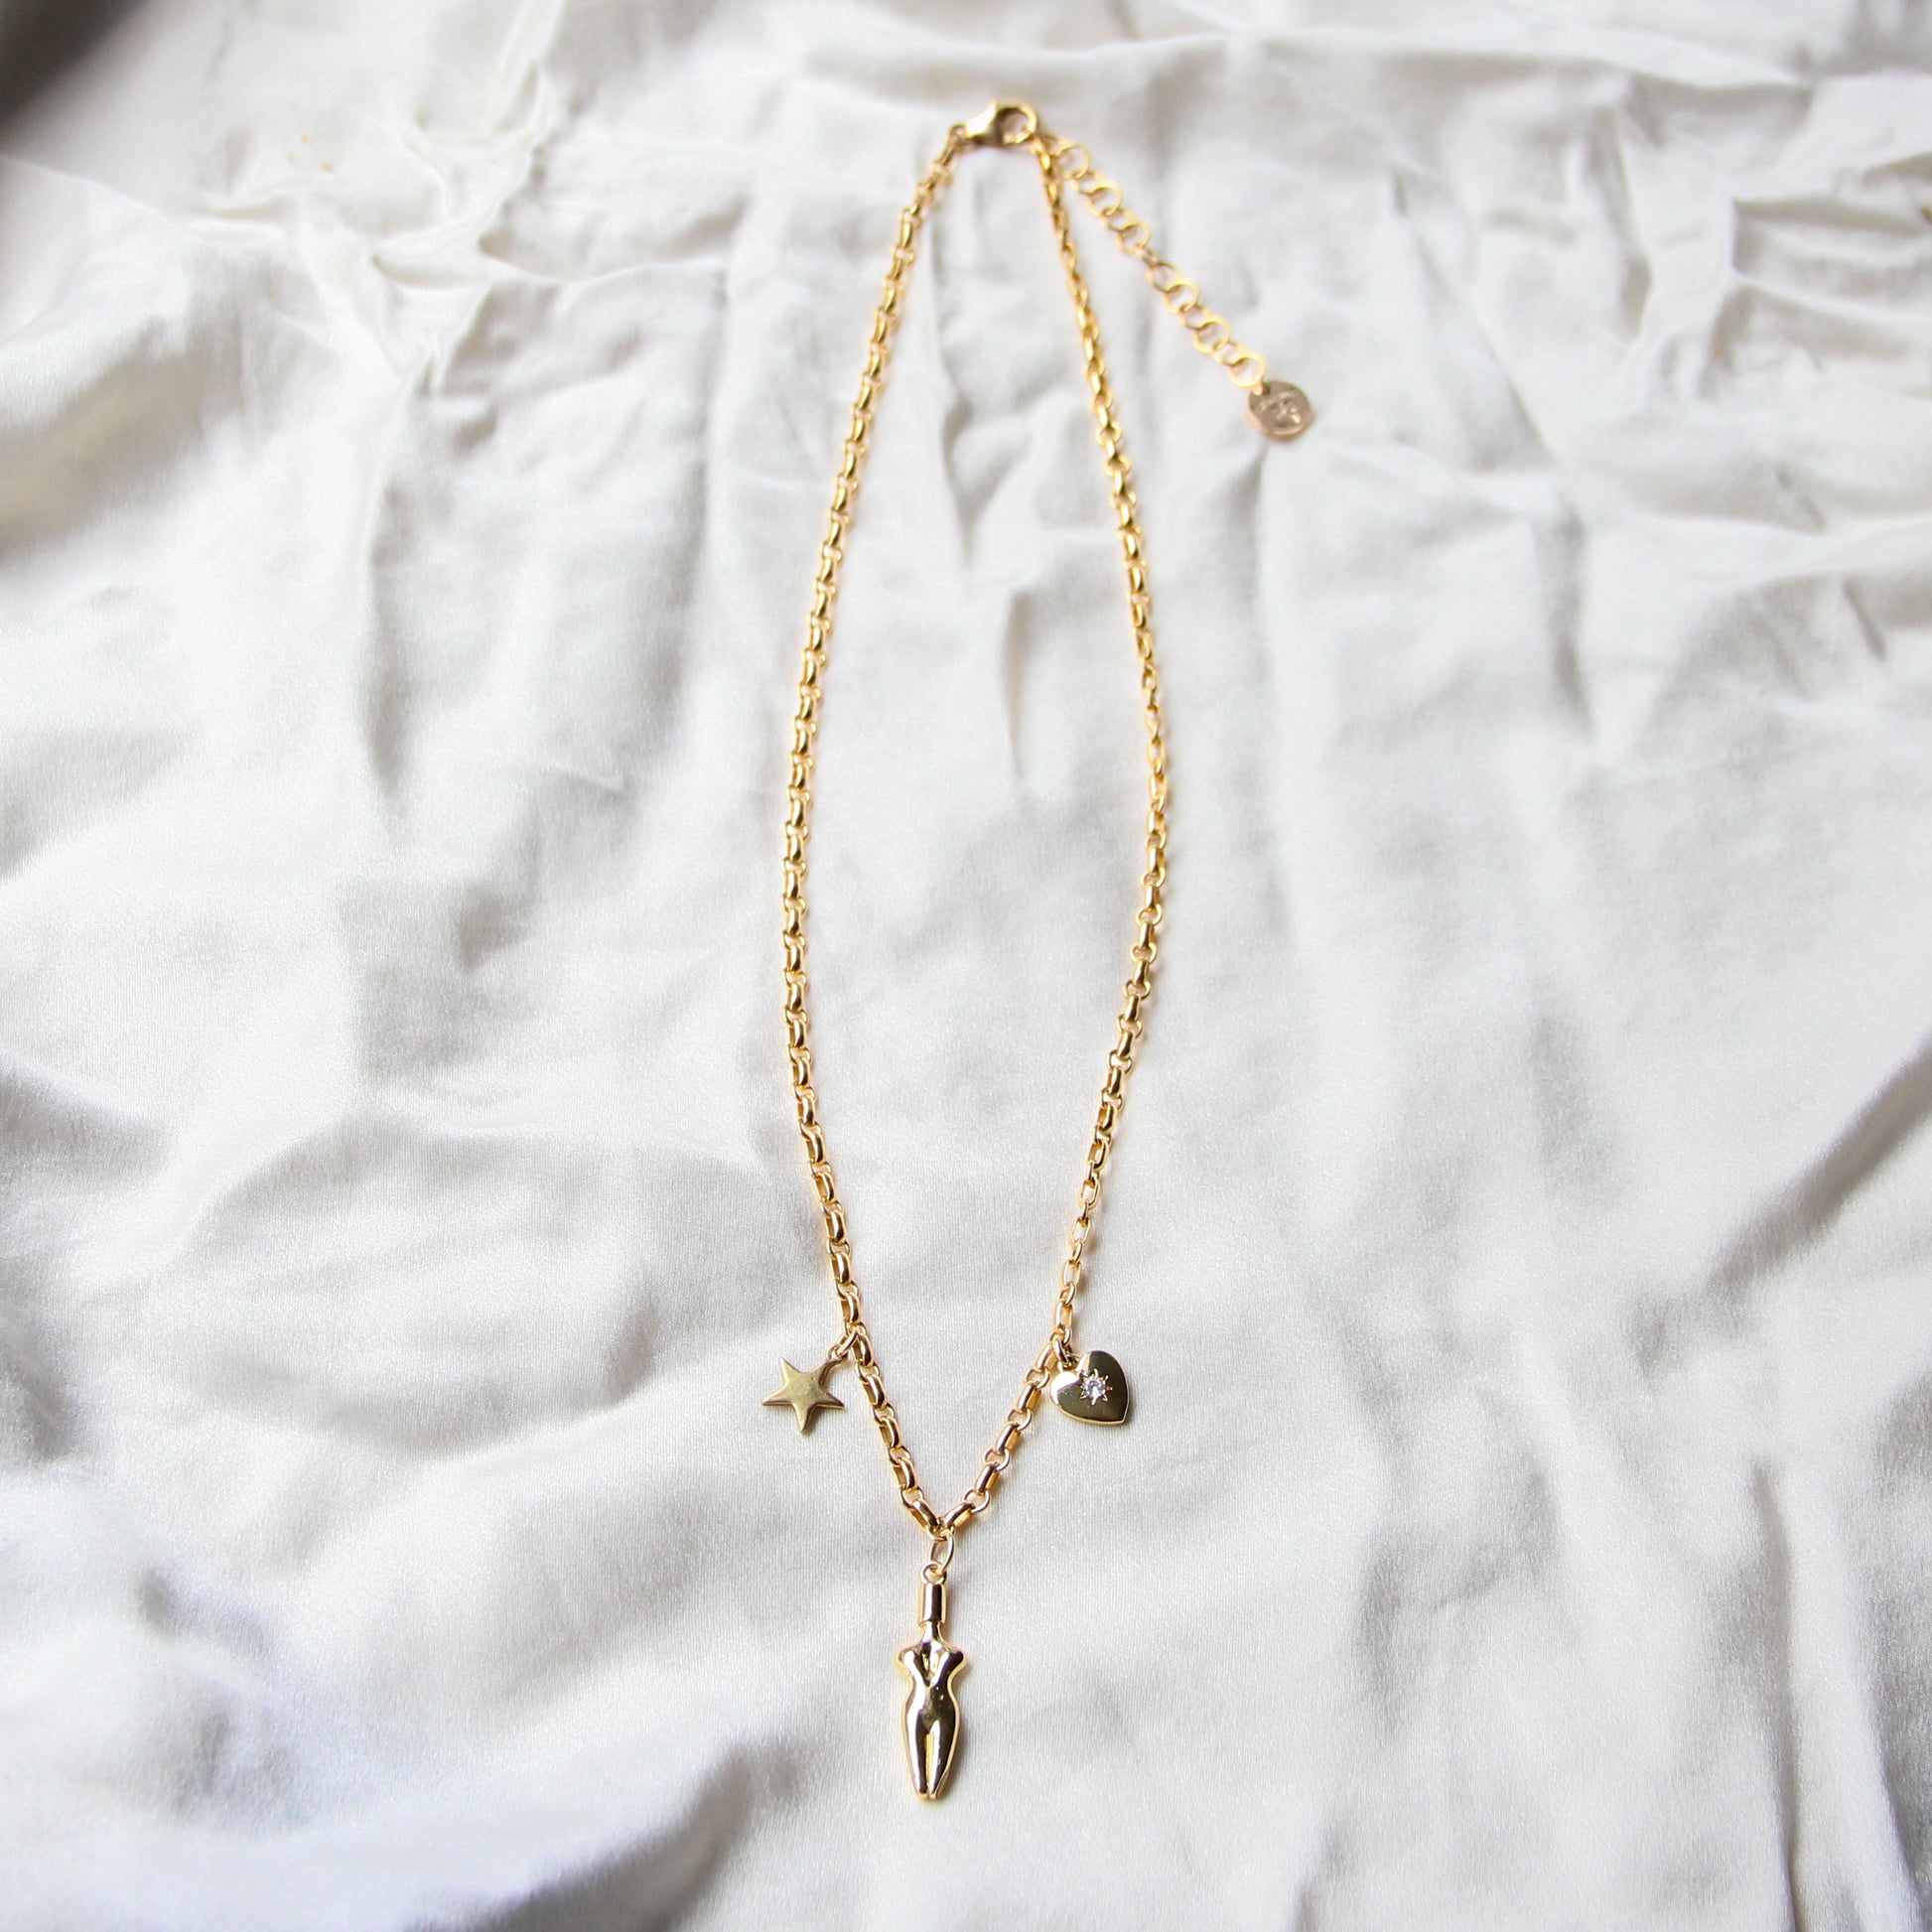 3 inch Extender Chain for Necklaces - Silver or Gold Filled Gold-Filled